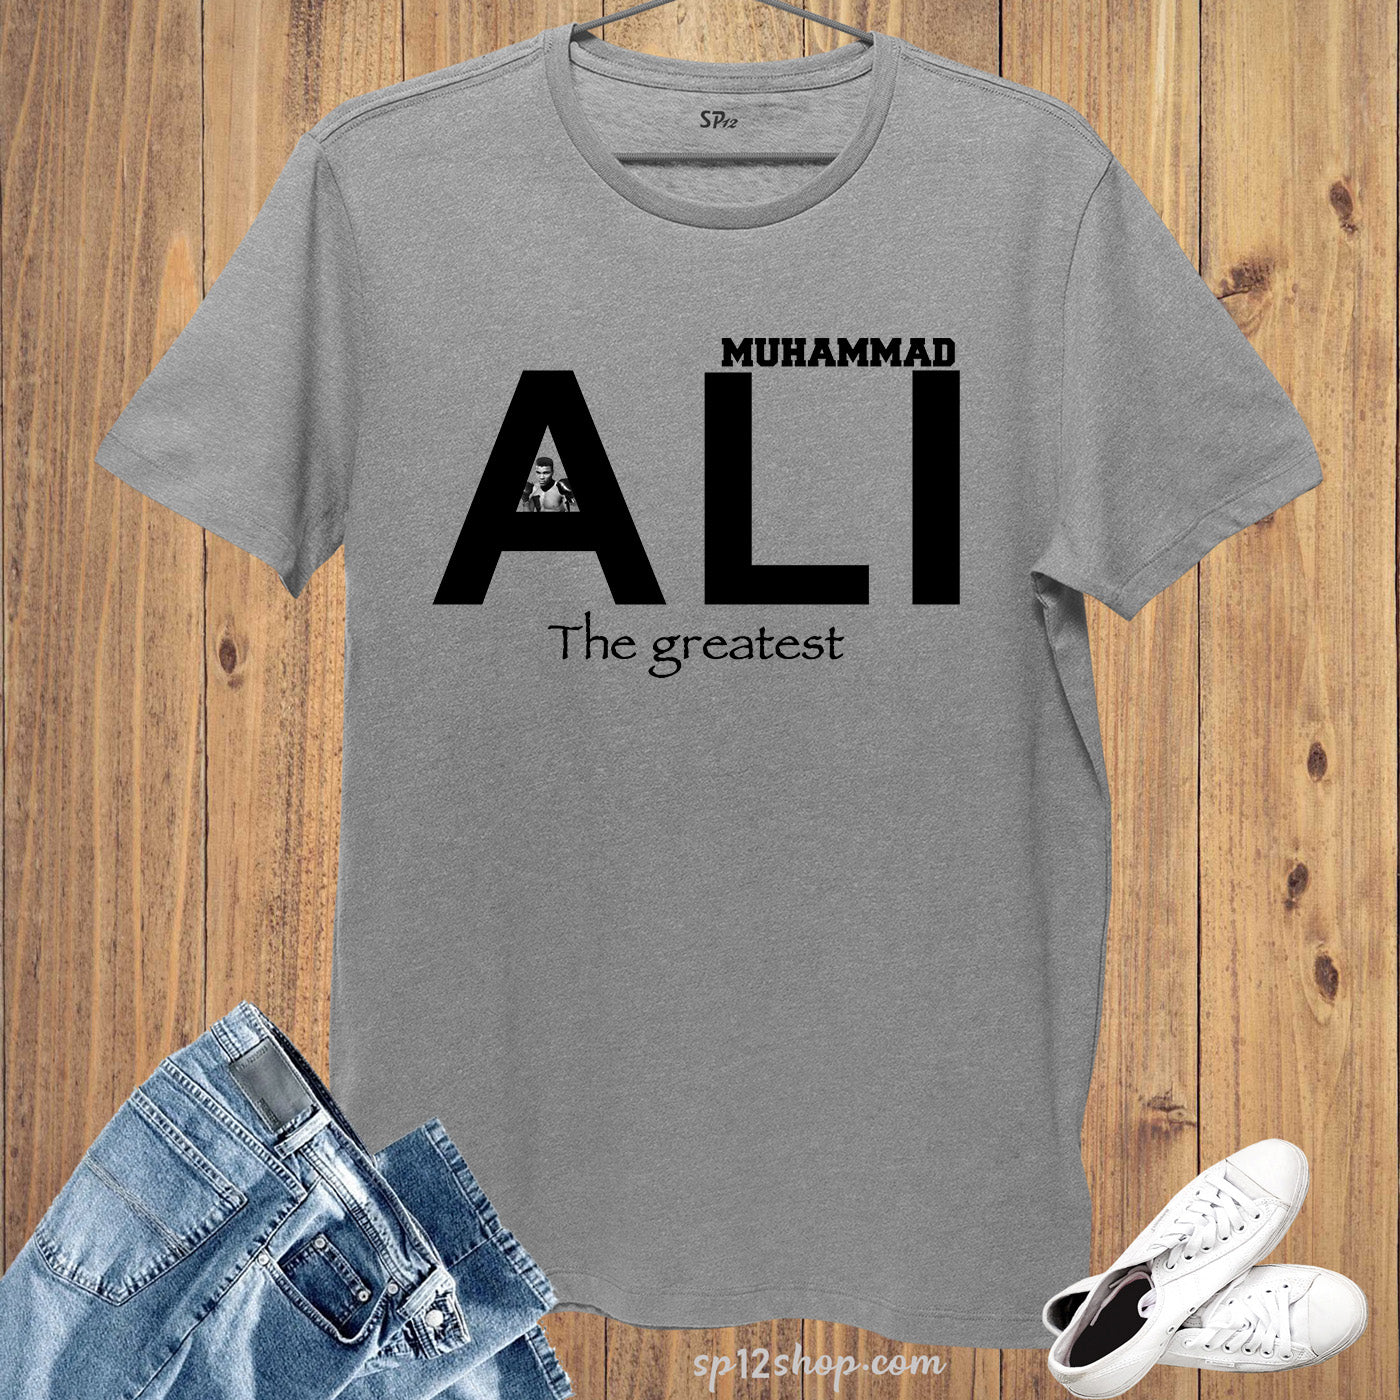 Mohammd Ali The Great Boxing Legend Boxer Gym T shirt